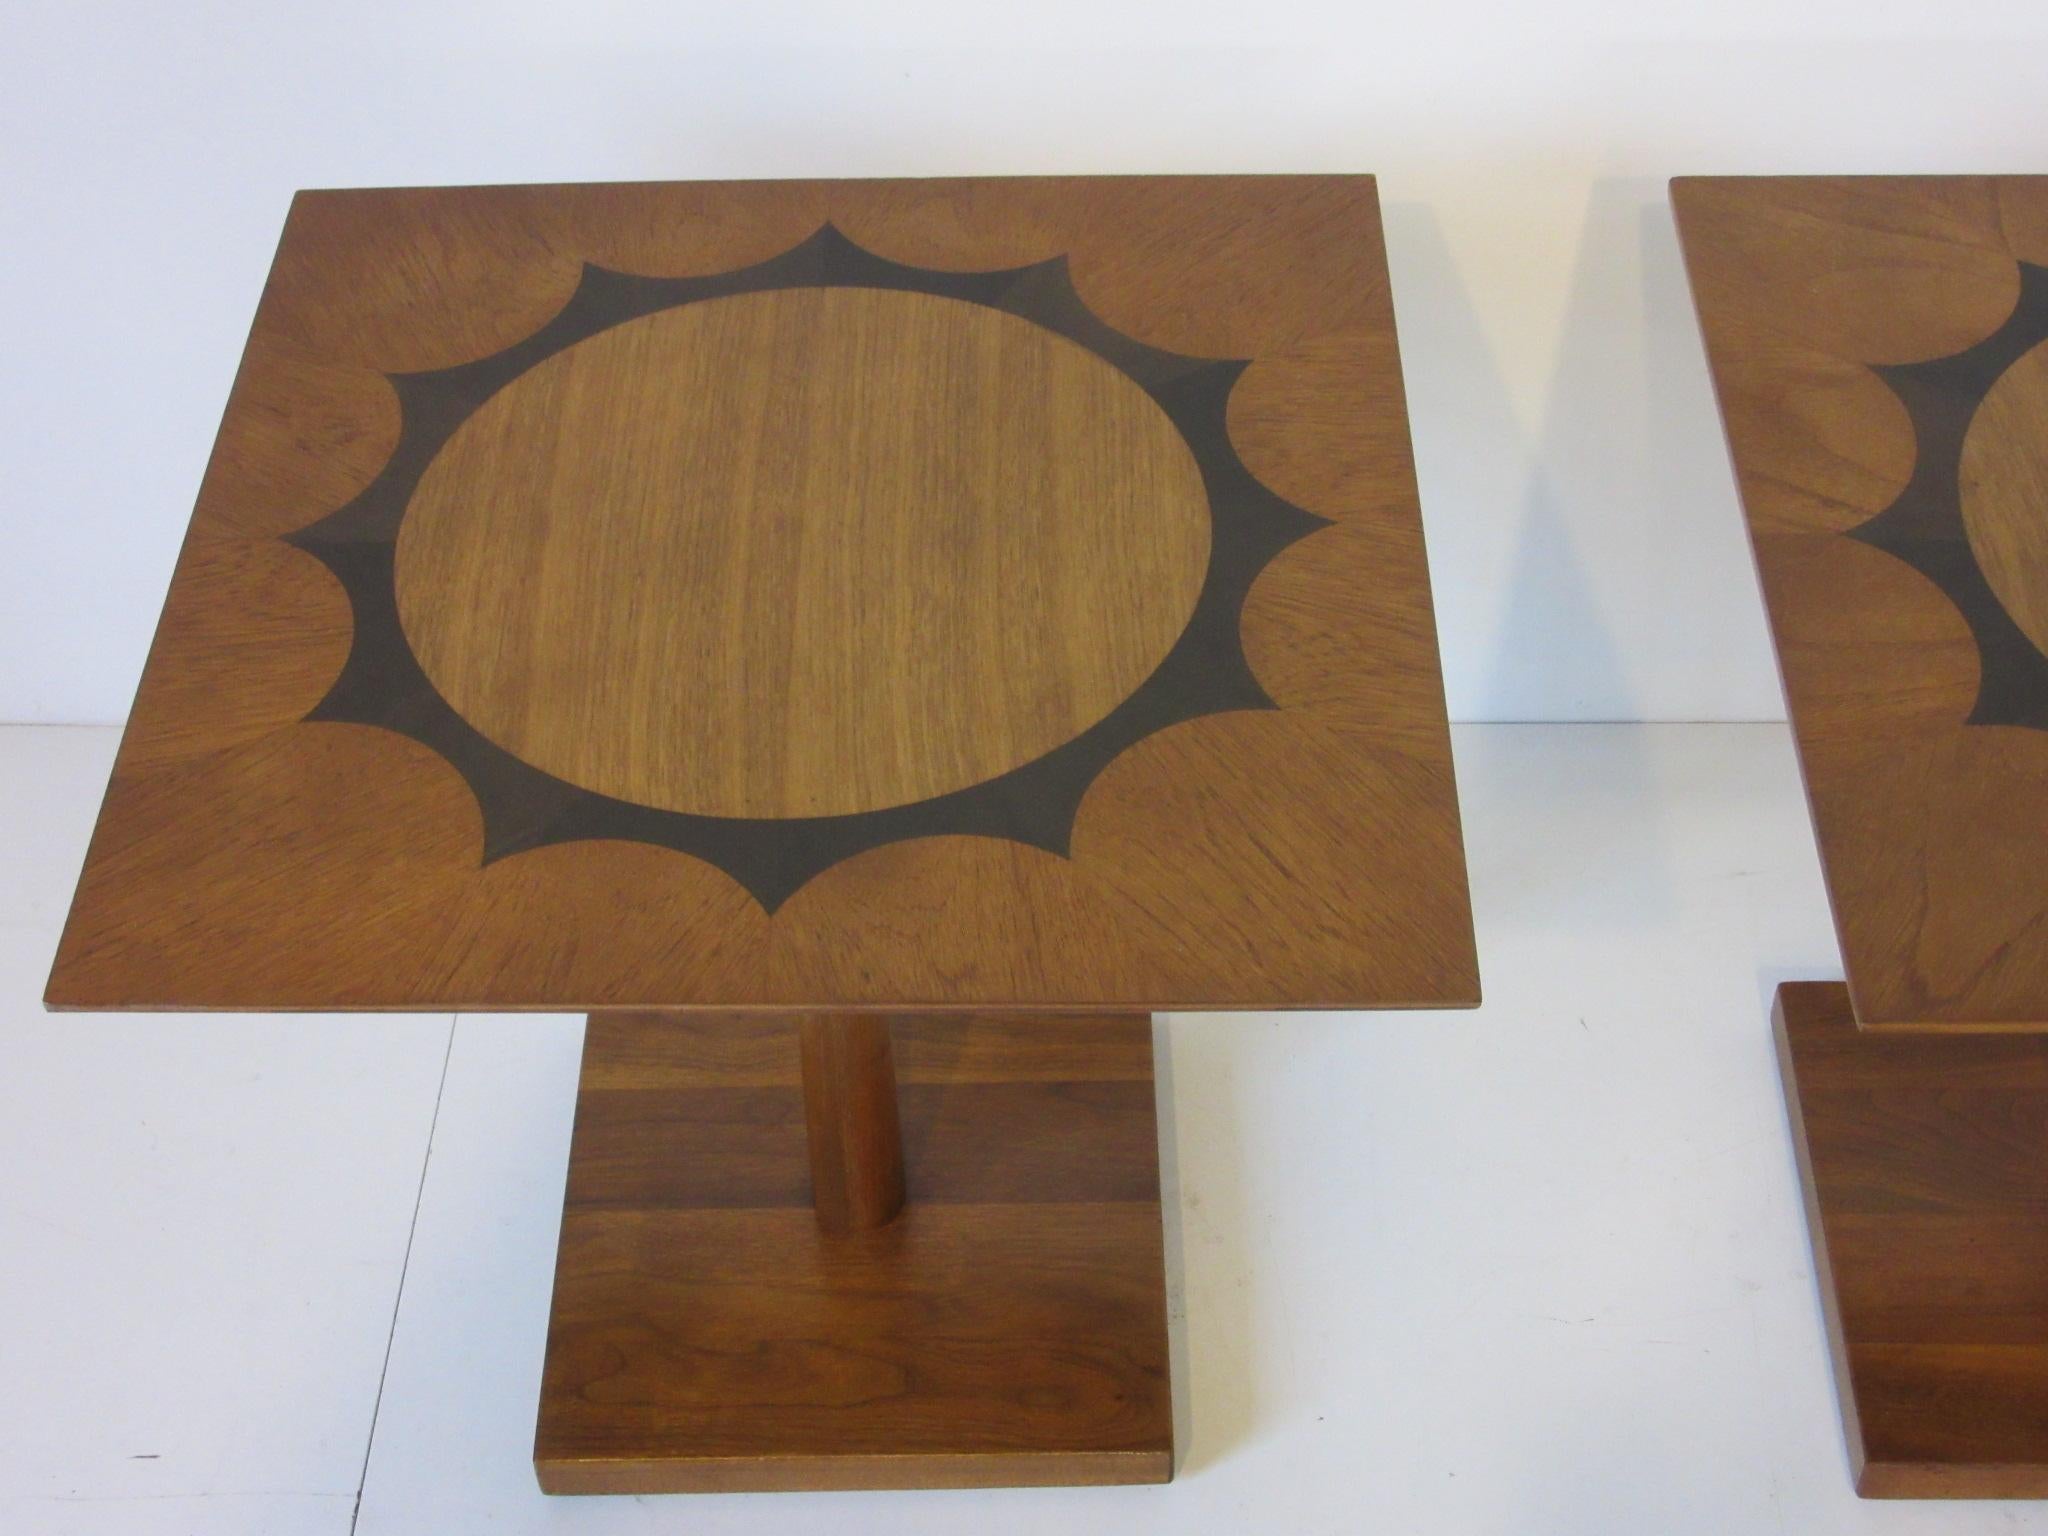 A pair of well crafted pedestal end tables in mahogany and walnut with a rosewood inlay design to the top, in the manner of the Baker Furniture Company.